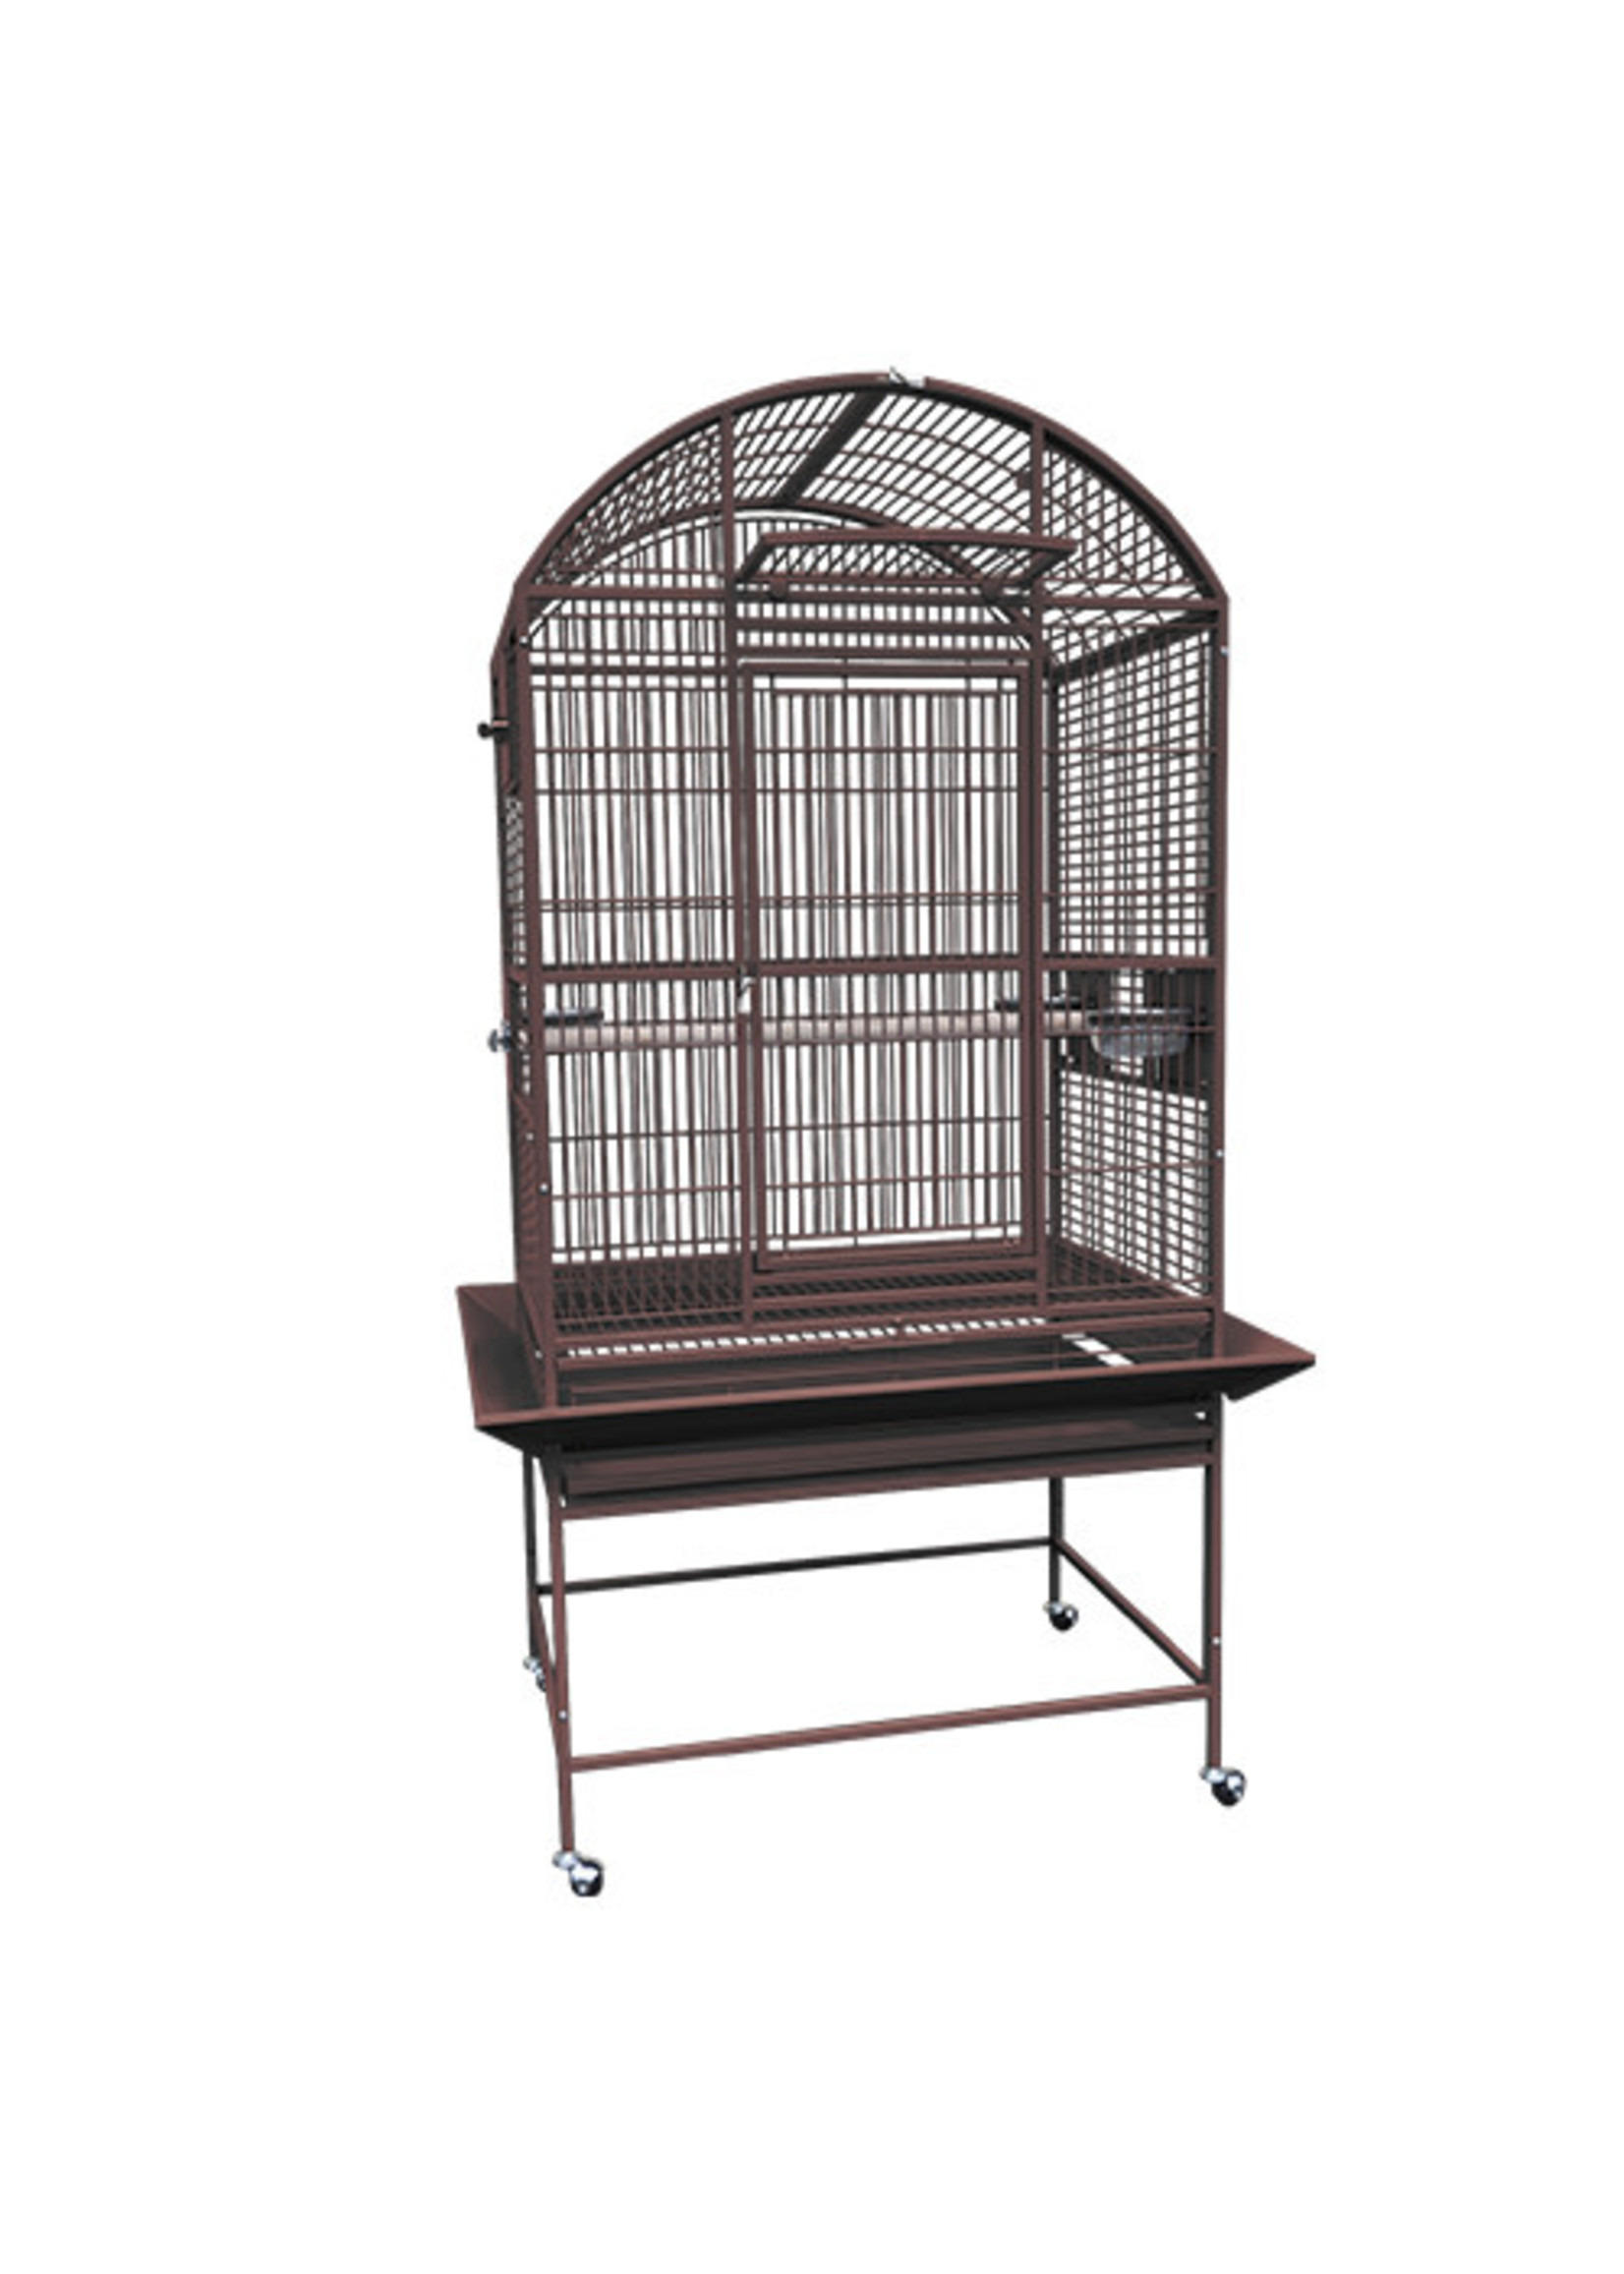 Kings Cages Kings Cages  9003223 Cage